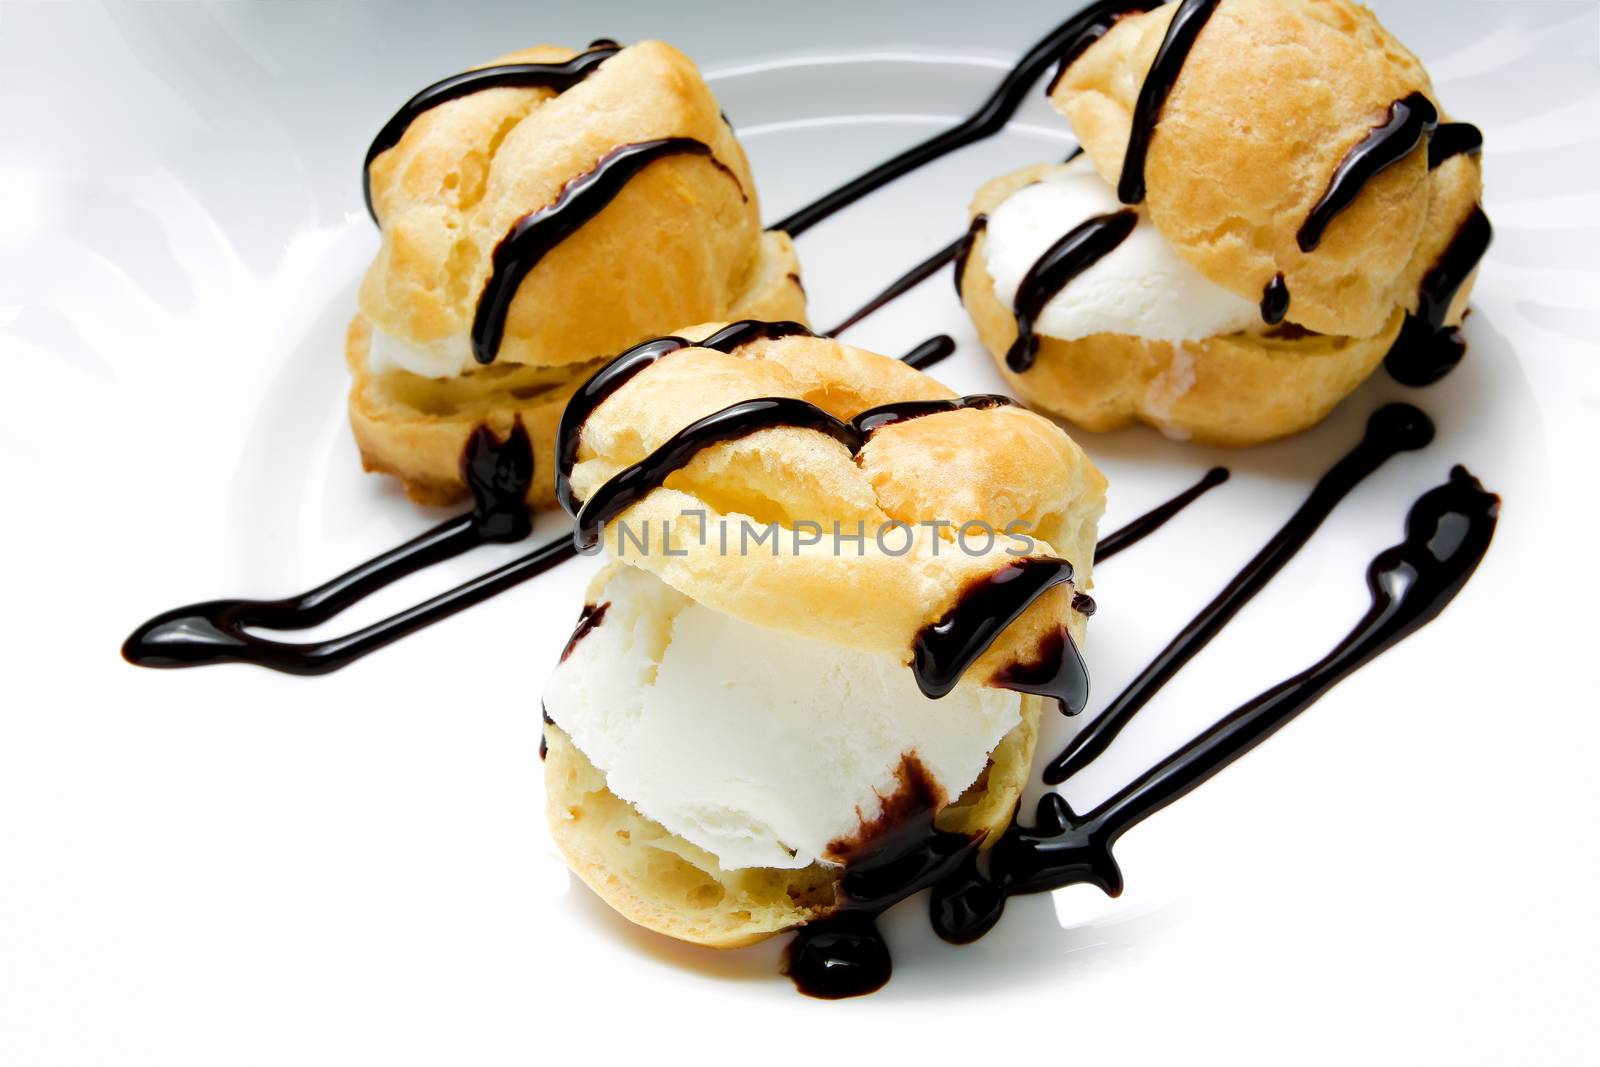 Profiteroles with ice cream. On a white background